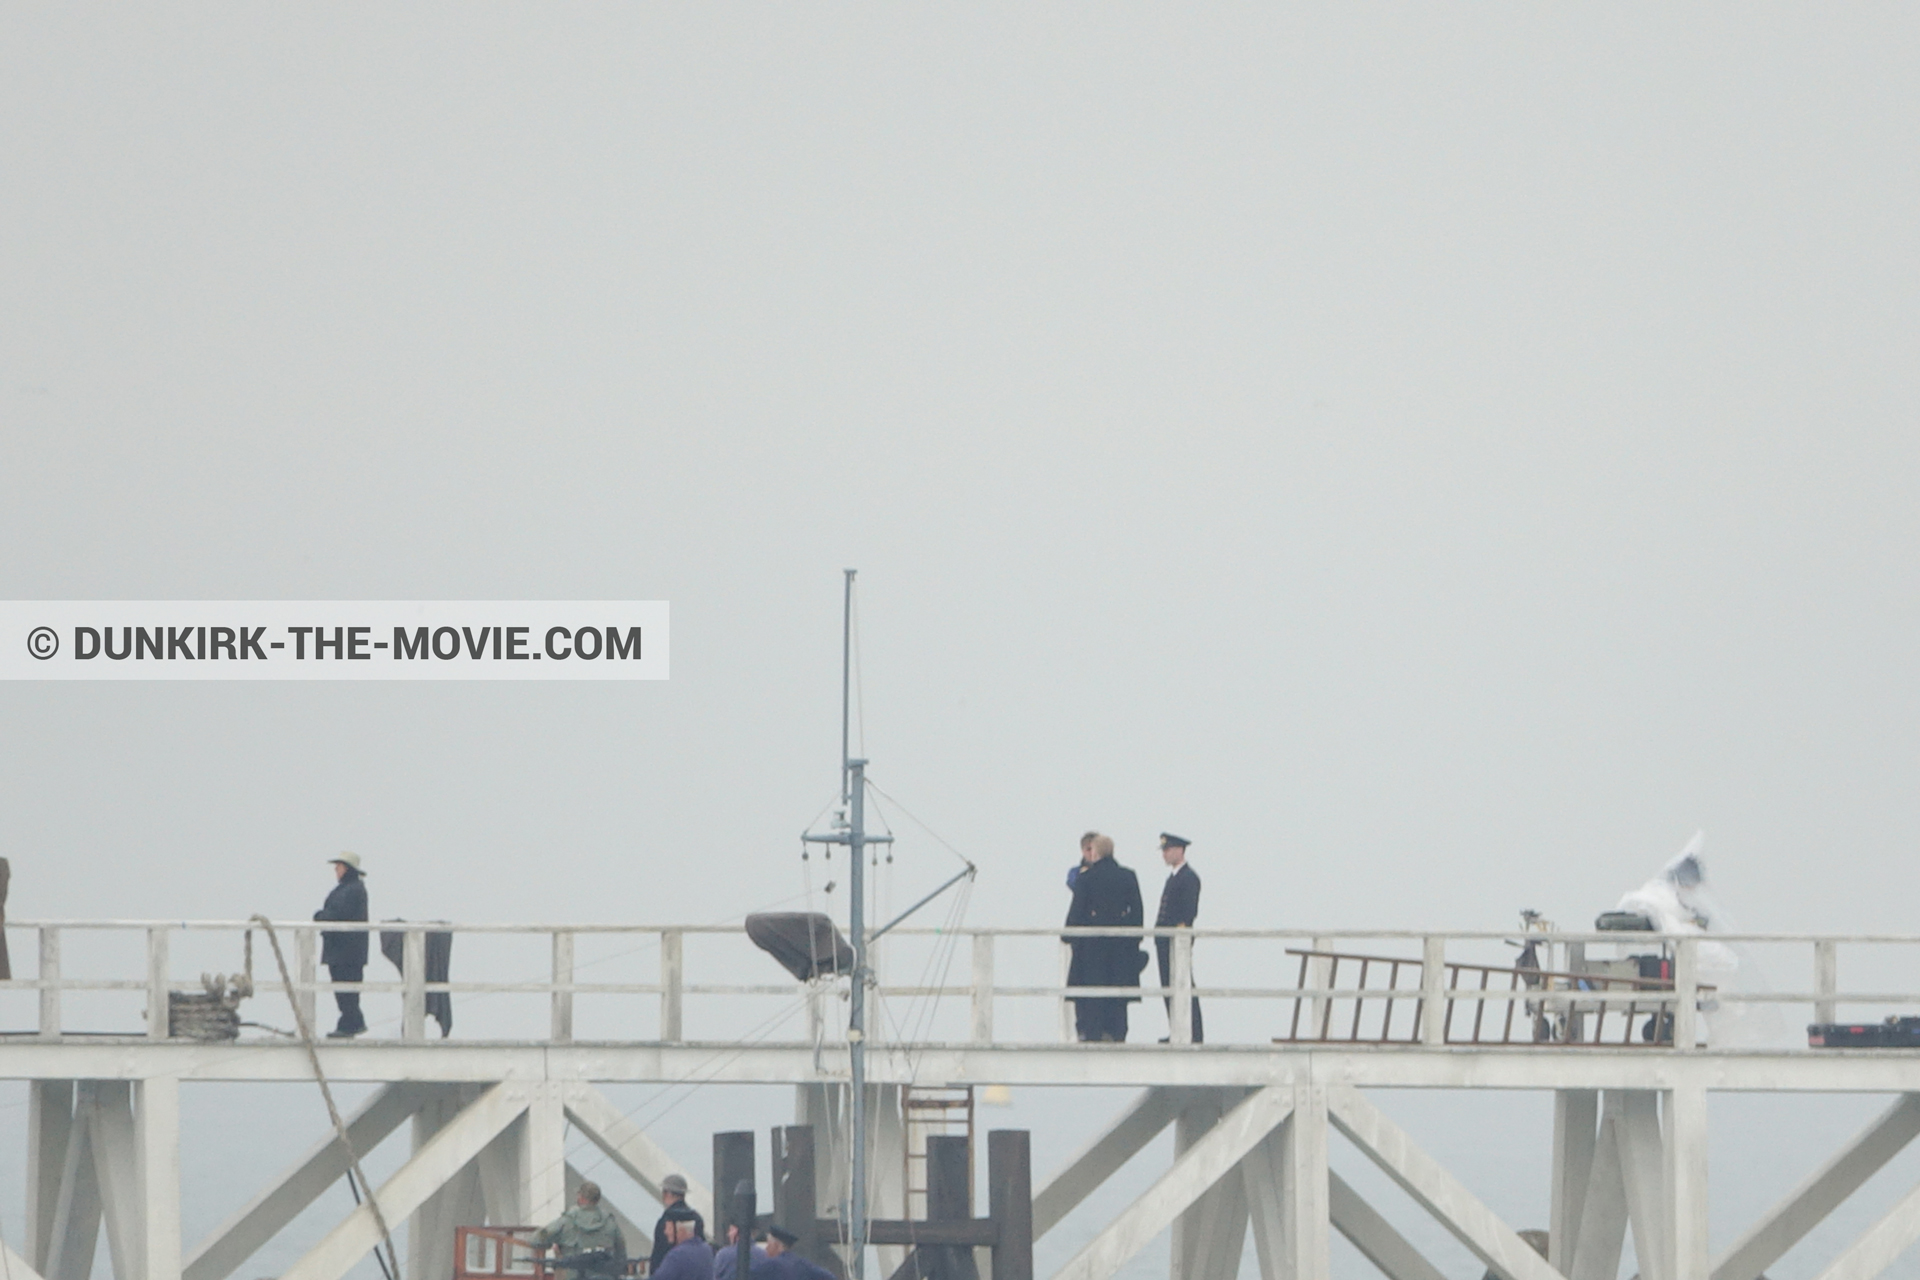 Picture with actor, grey sky, EST pier, Kenneth Branagh, technical team,  from behind the scene of the Dunkirk movie by Nolan